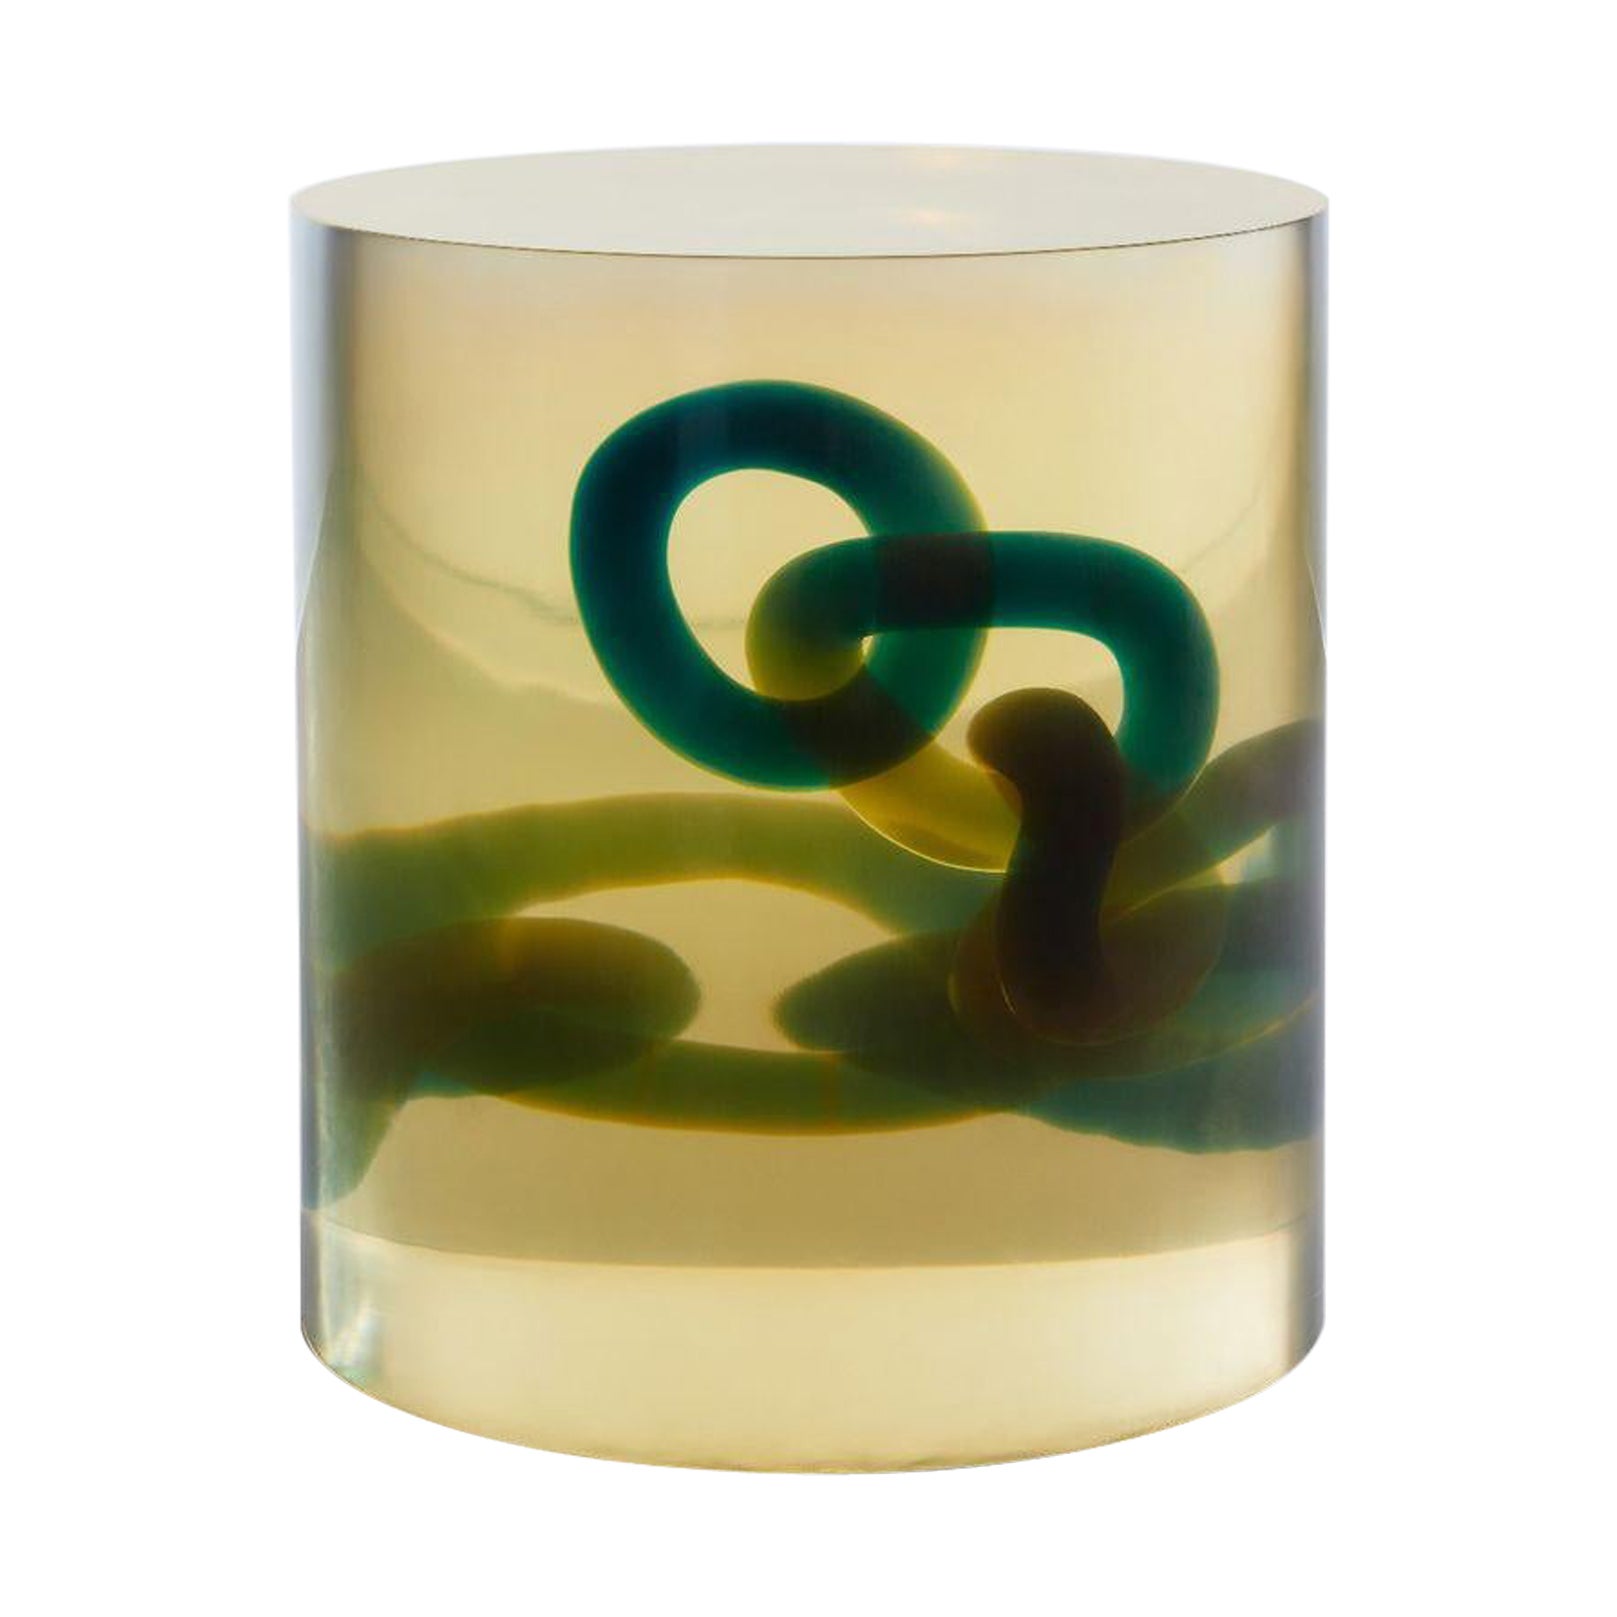 Seeing through Your Illusions Chain, Olive Translucent Resin Stool by Hua Wang For Sale